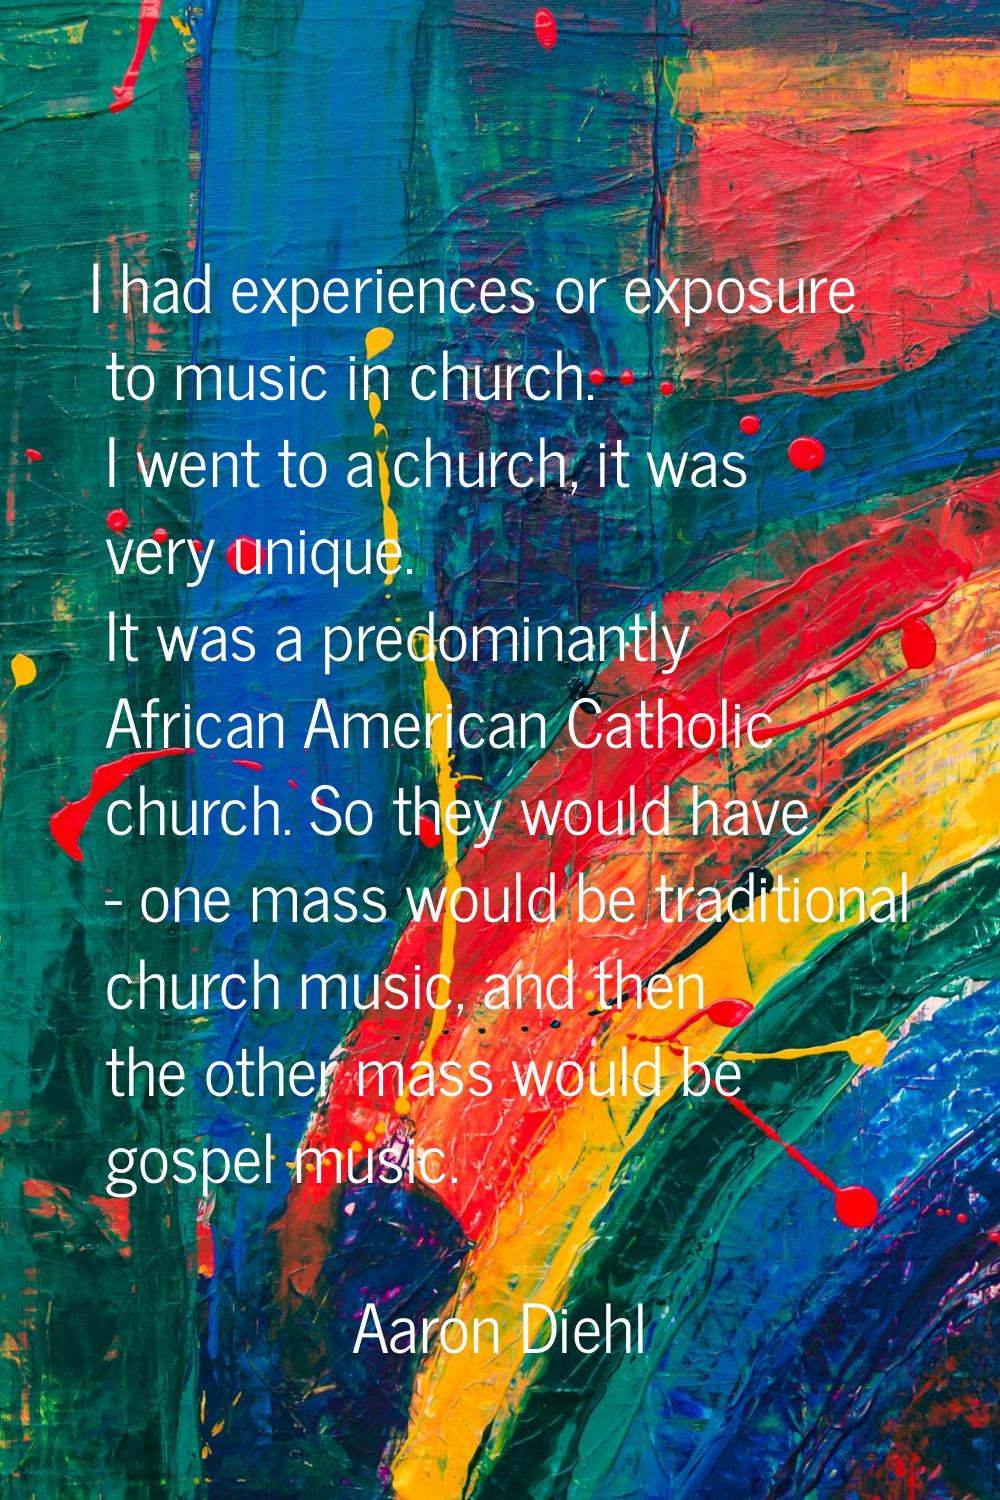 I had experiences or exposure to music in church. I went to a church, it was very unique. It was a 